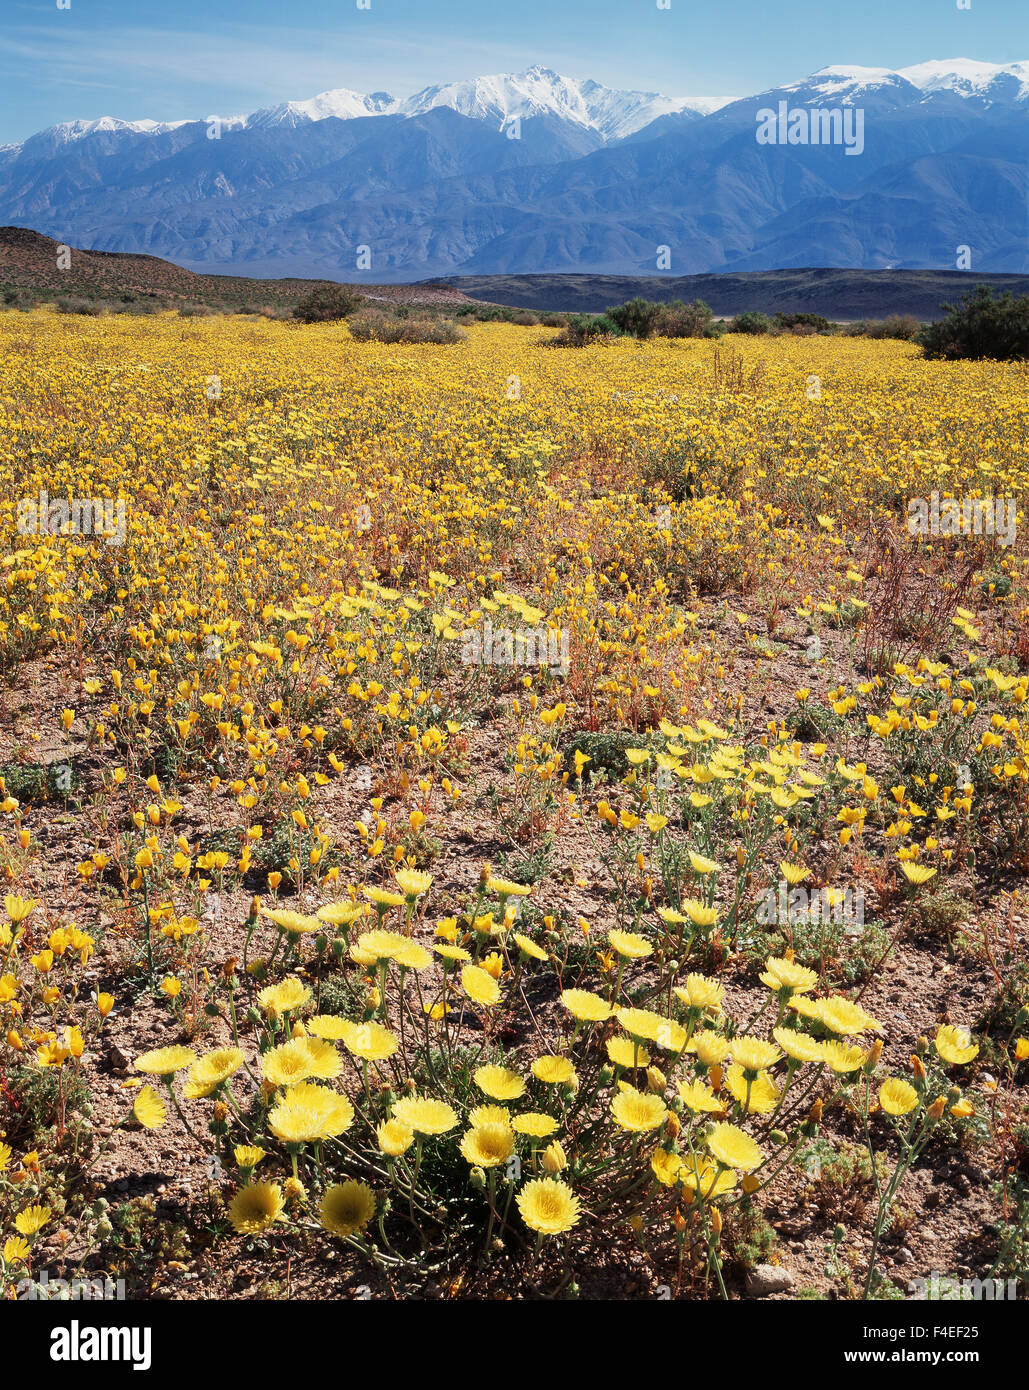 California, Owens Valley, Desert Dandelion (Malacothrix glabrata) in a field of Sun Cups wildflowers (Camissonia brevipes ) below the White Mountains. (Large format sizes available) Stock Photo